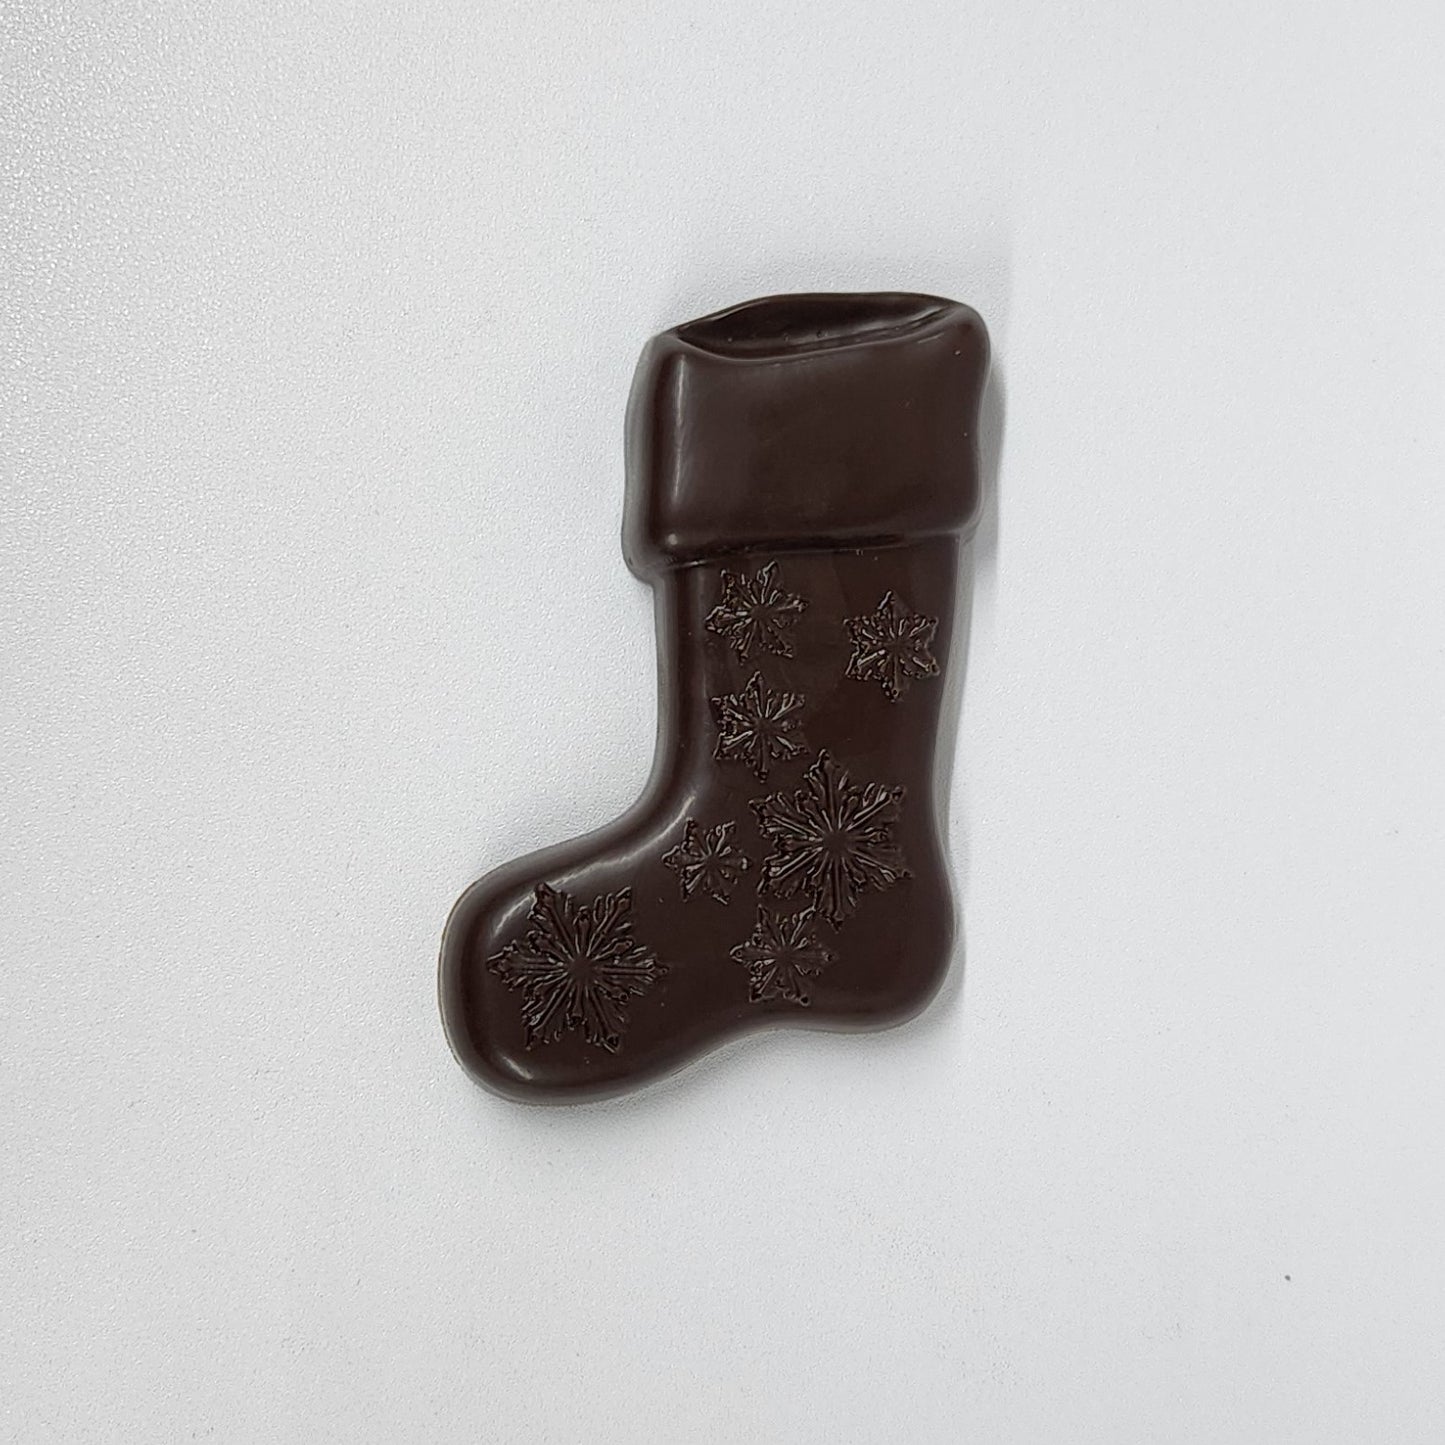 Solid dark chocolate stocking with snowflakes